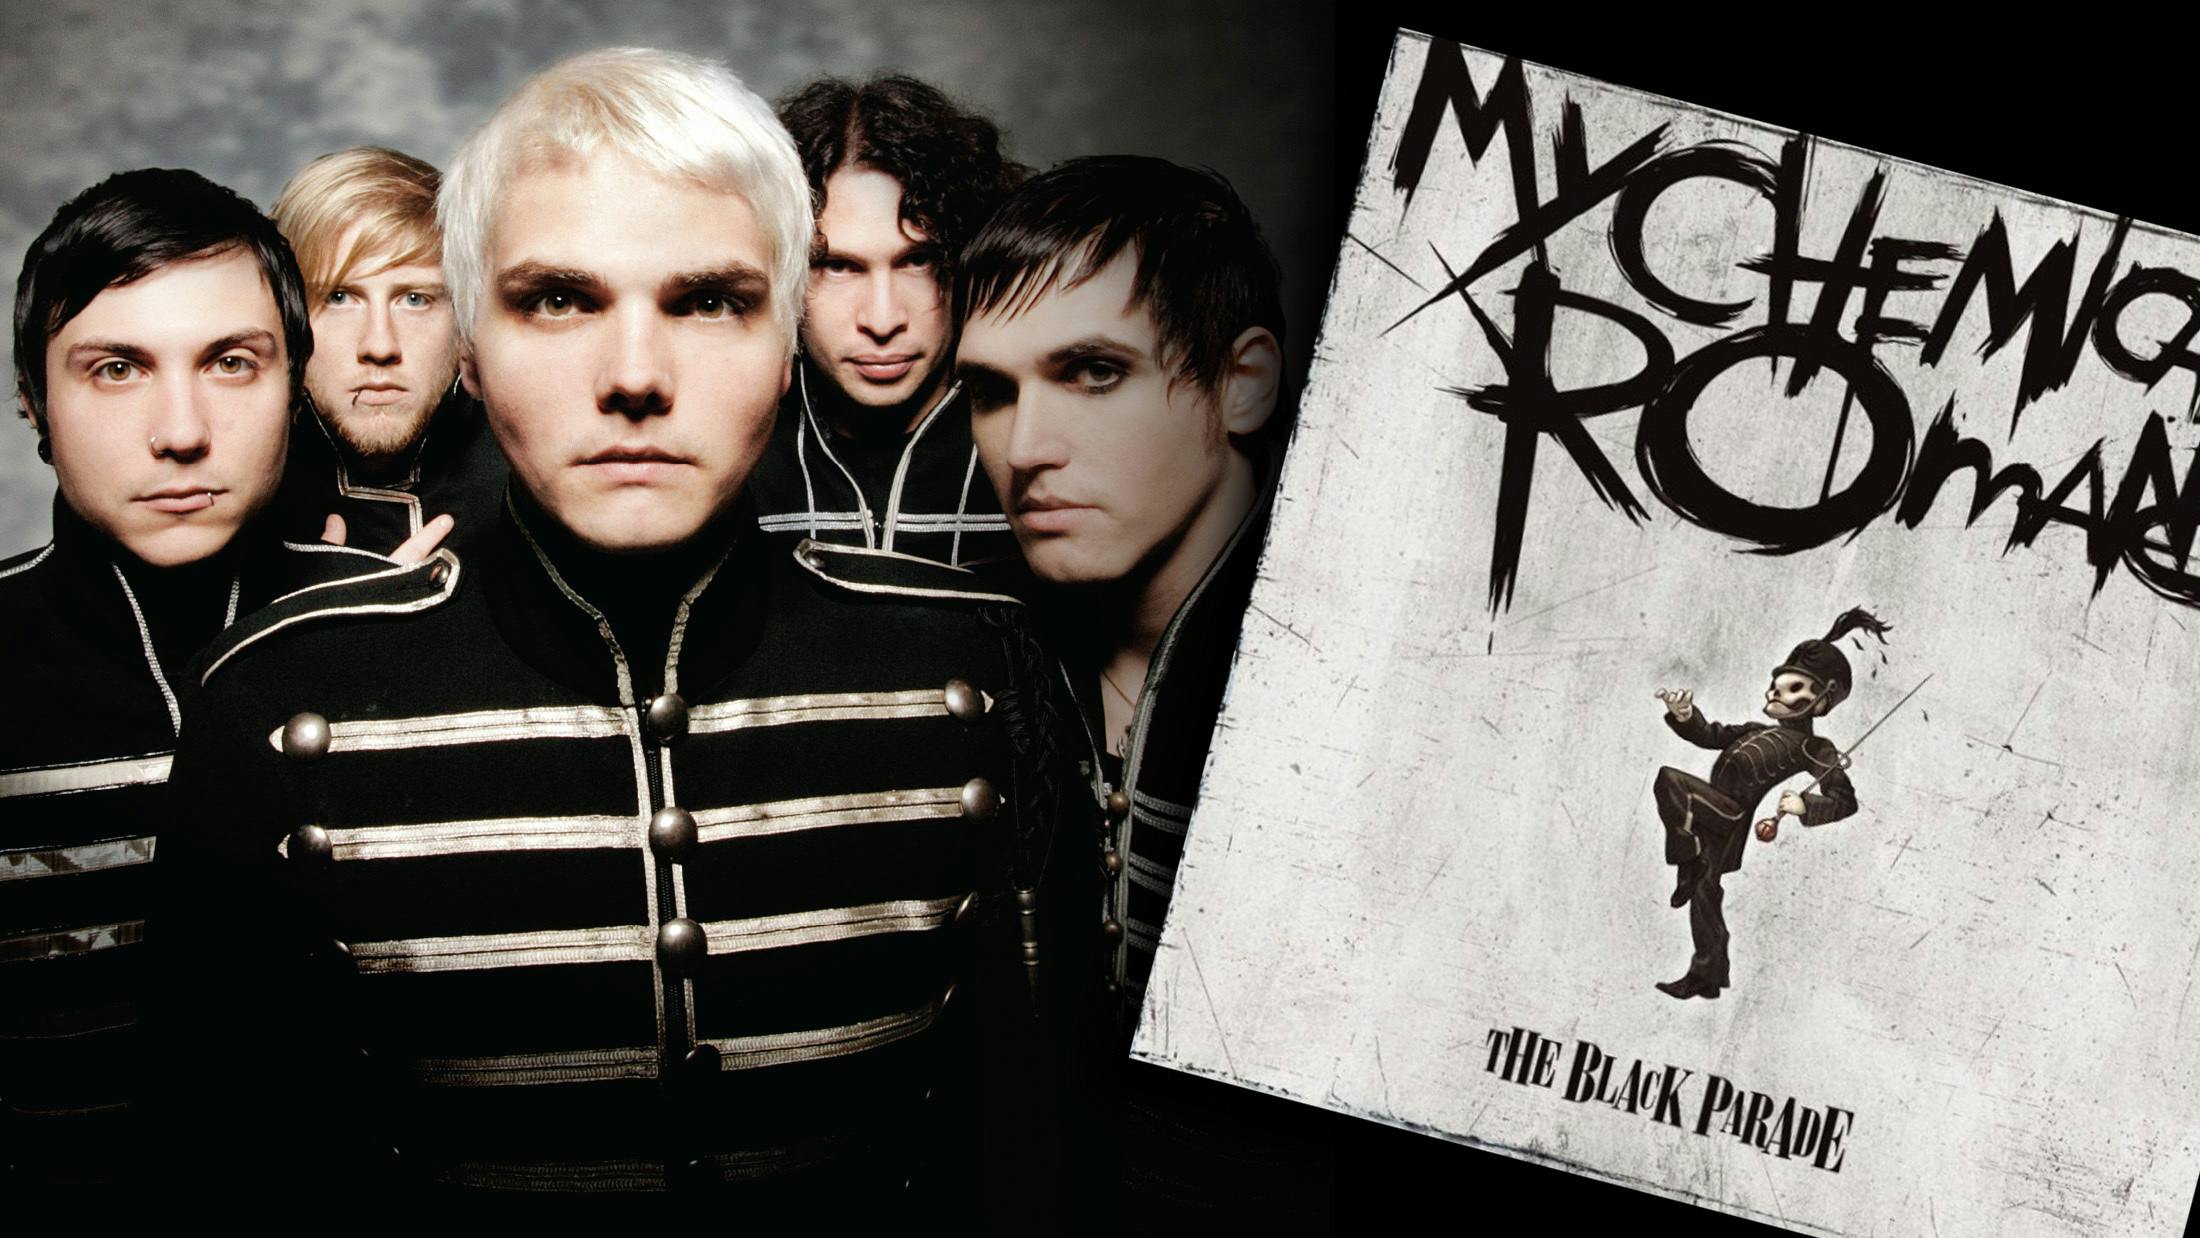 My Chemical Romance: Every song on The Black Parade, ranked from worst to best